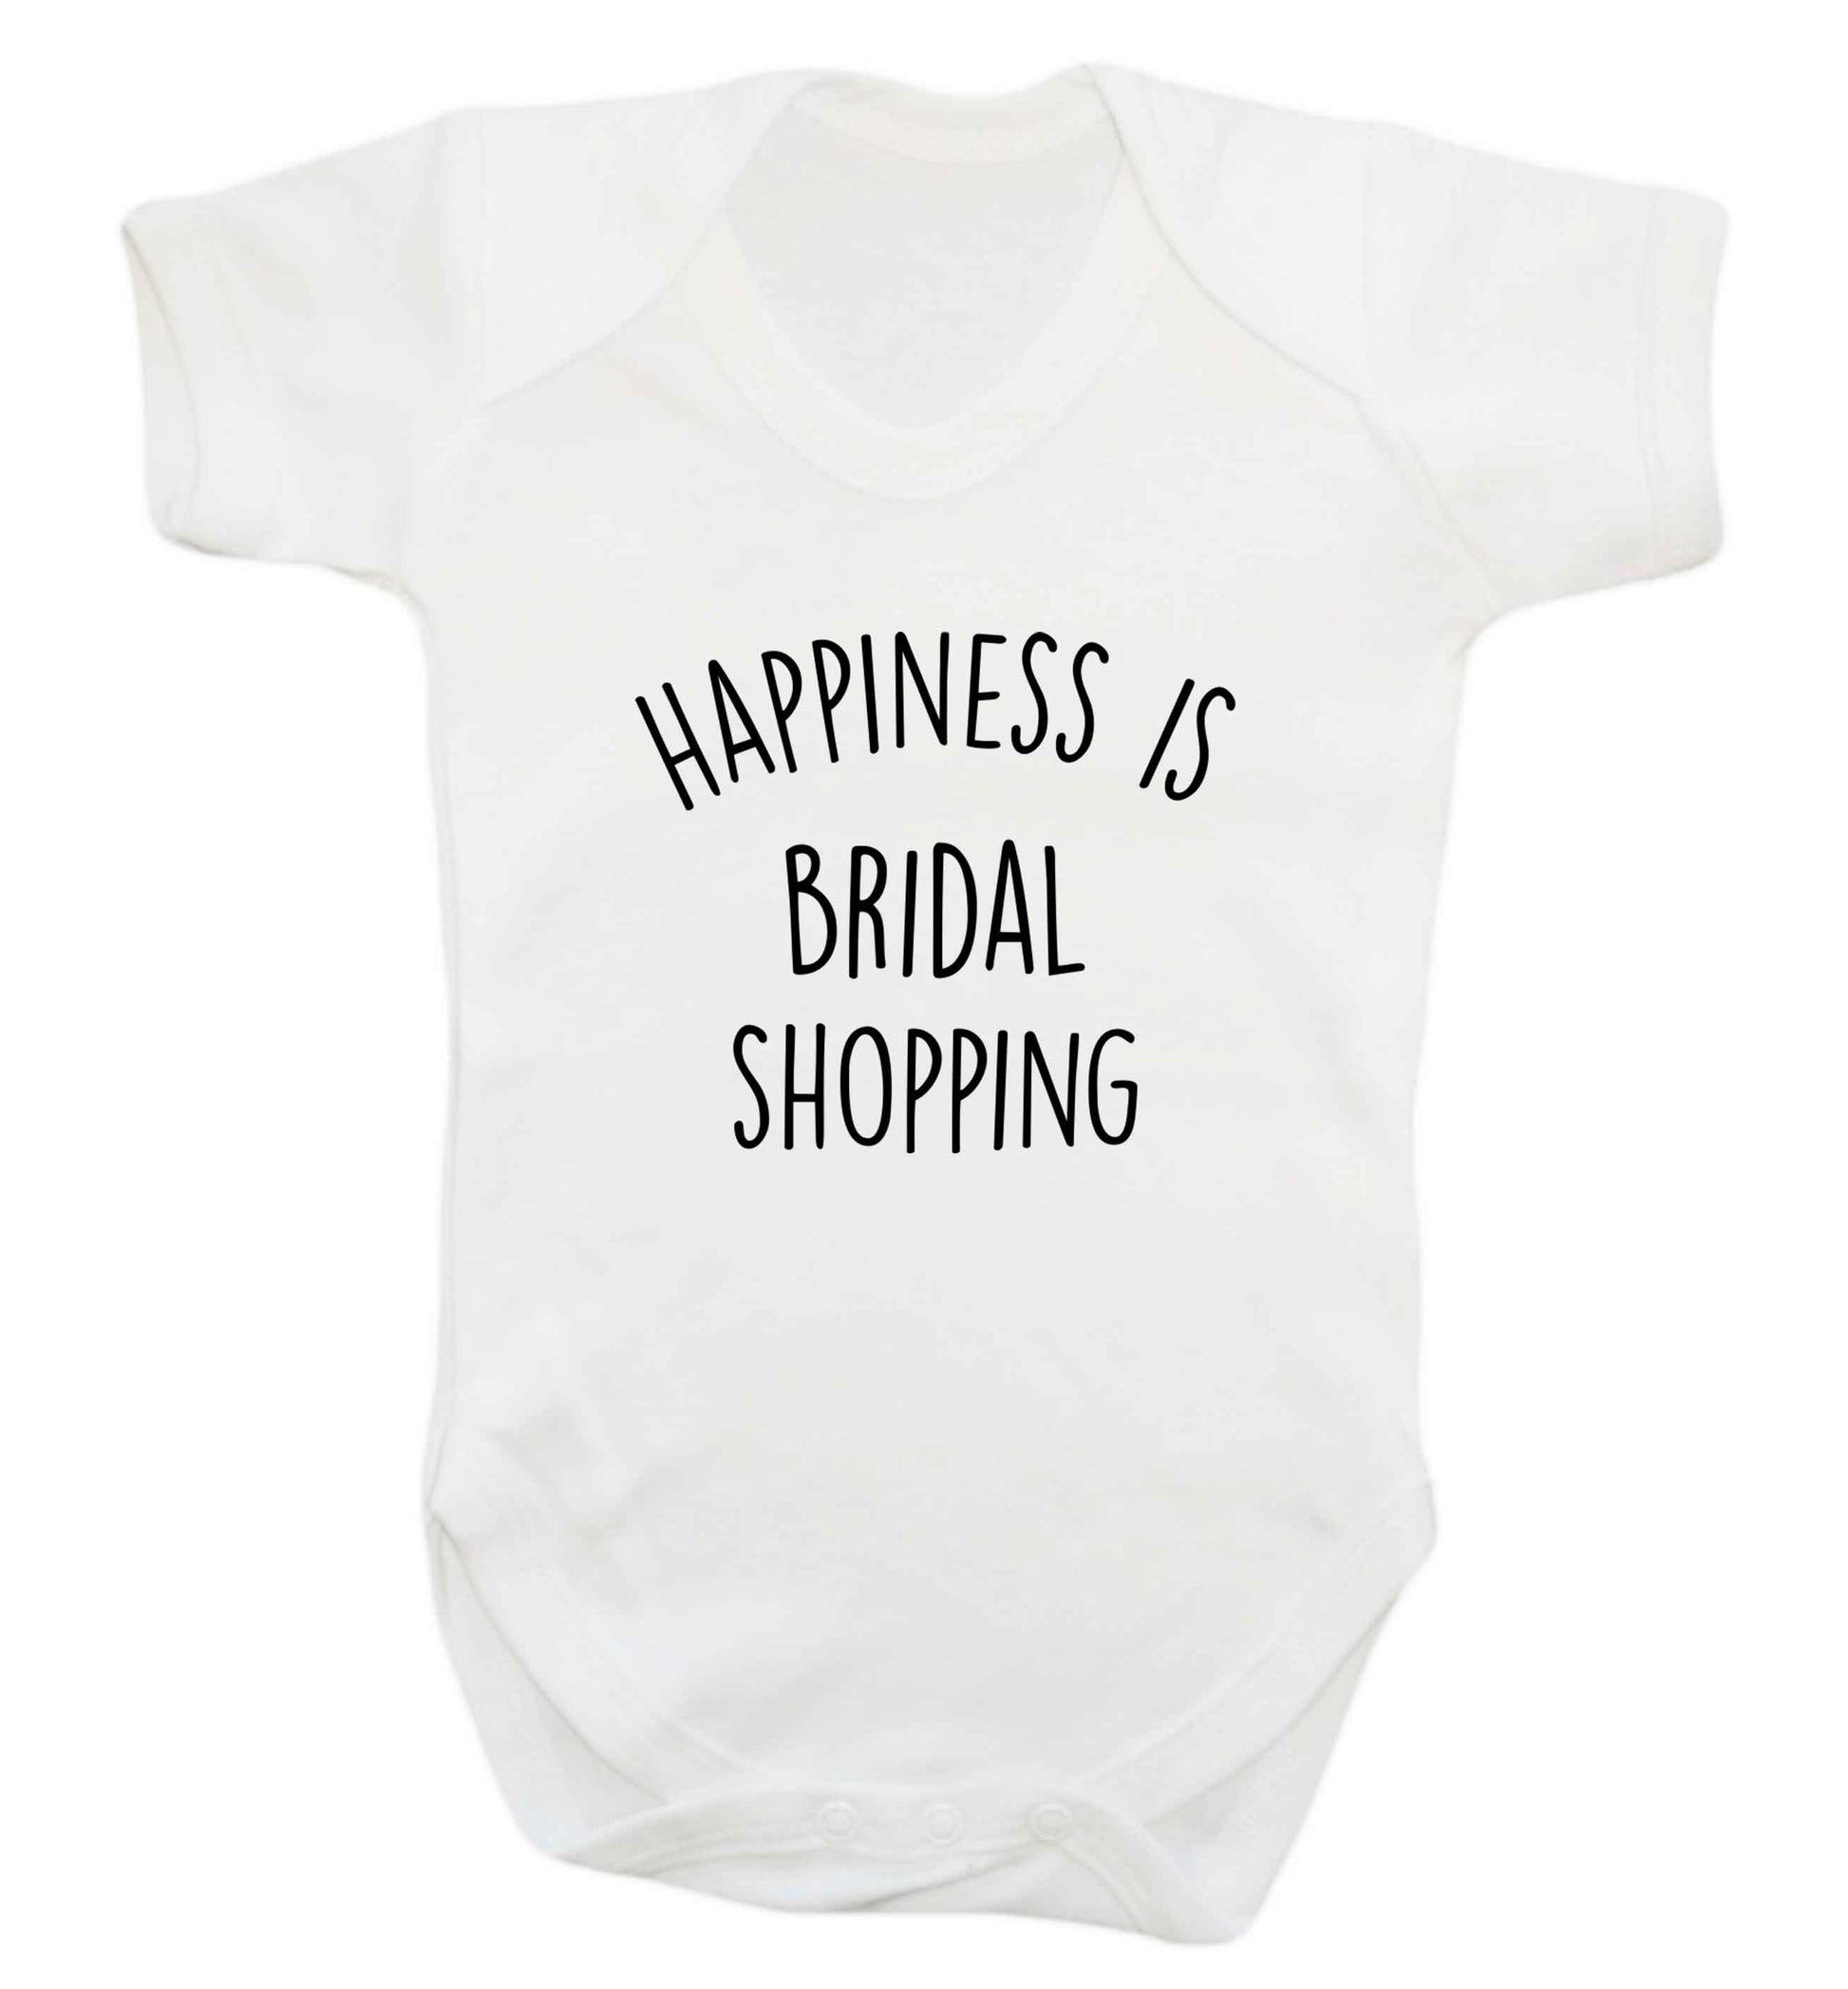 Happiness is bridal shopping baby vest white 18-24 months